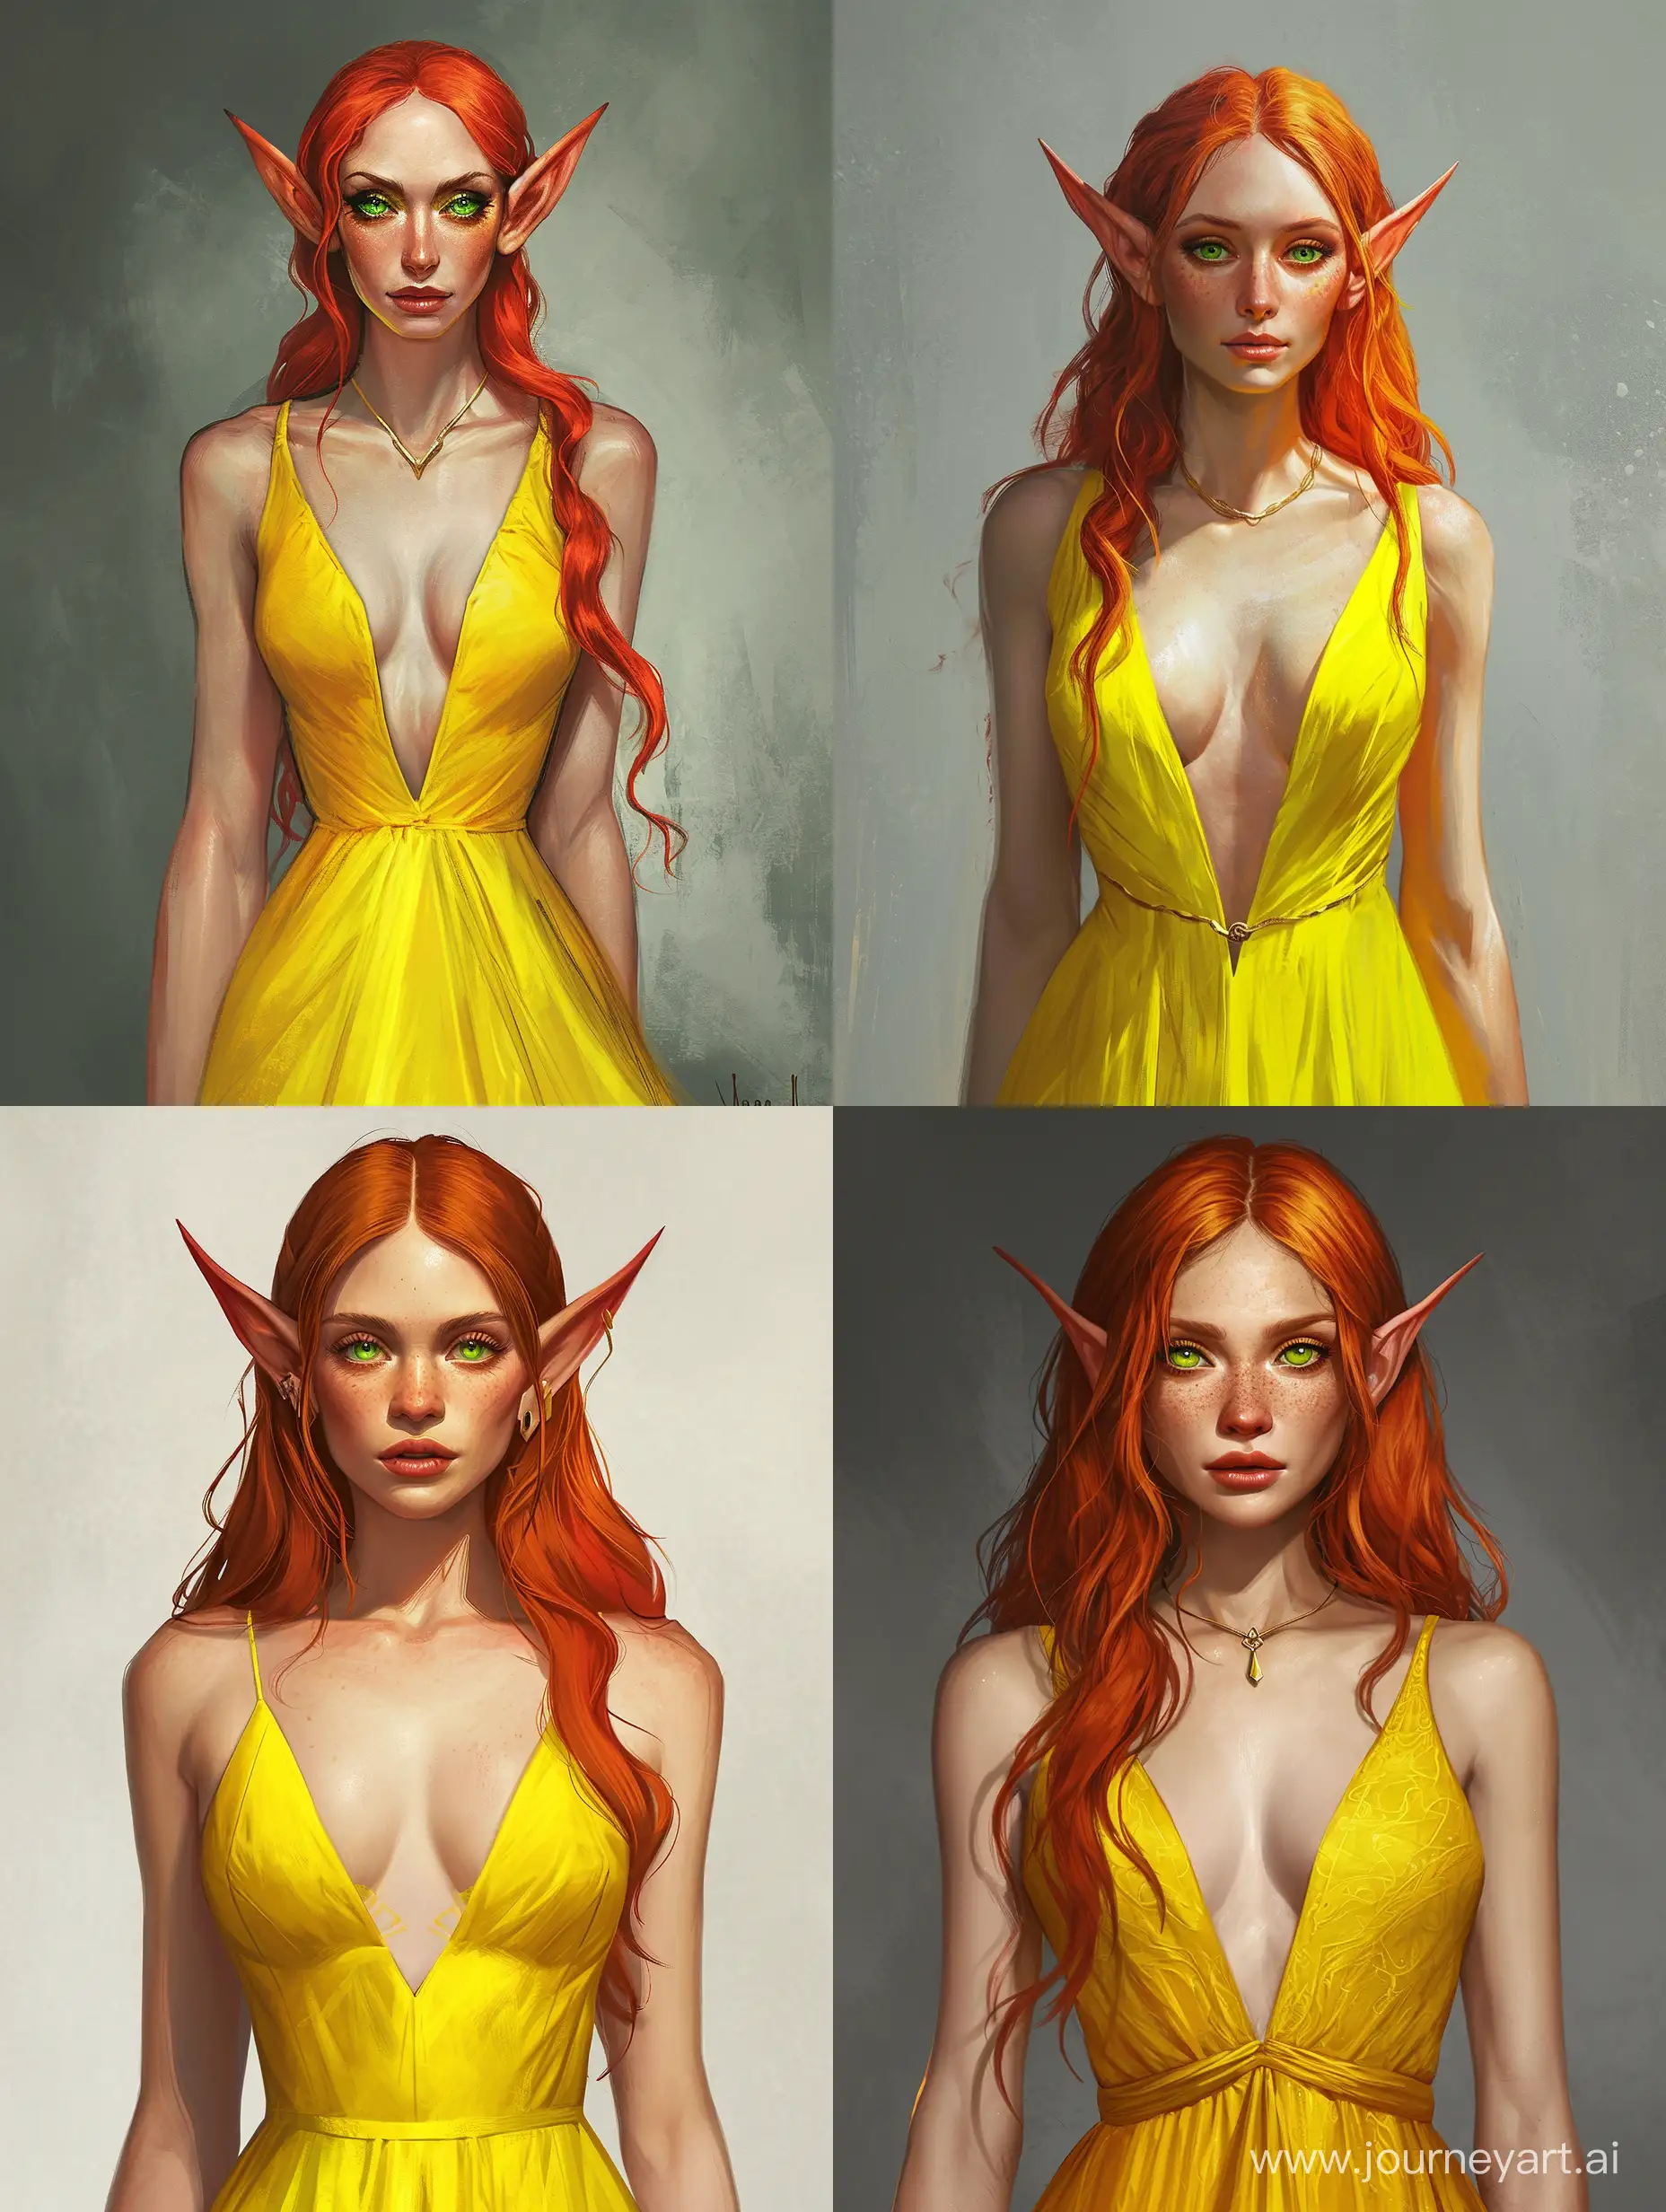 Elven-Woman-in-Vibrant-Yellow-Gown-with-Fiery-Red-Hair